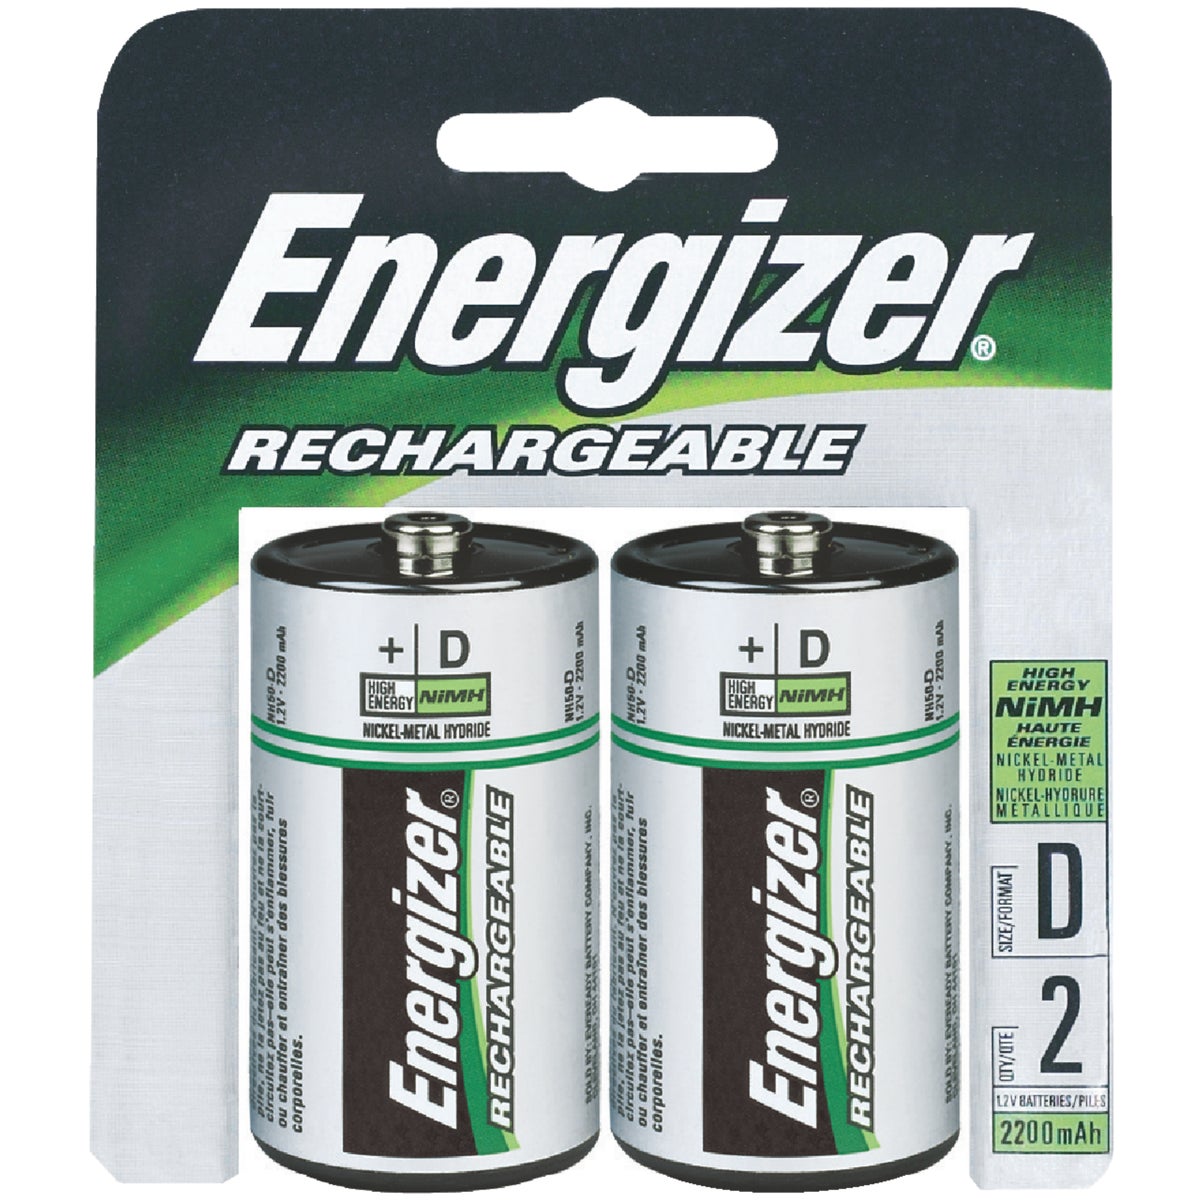 Item 828885, Universal rechargeable D batteries reduce waste and save you money.